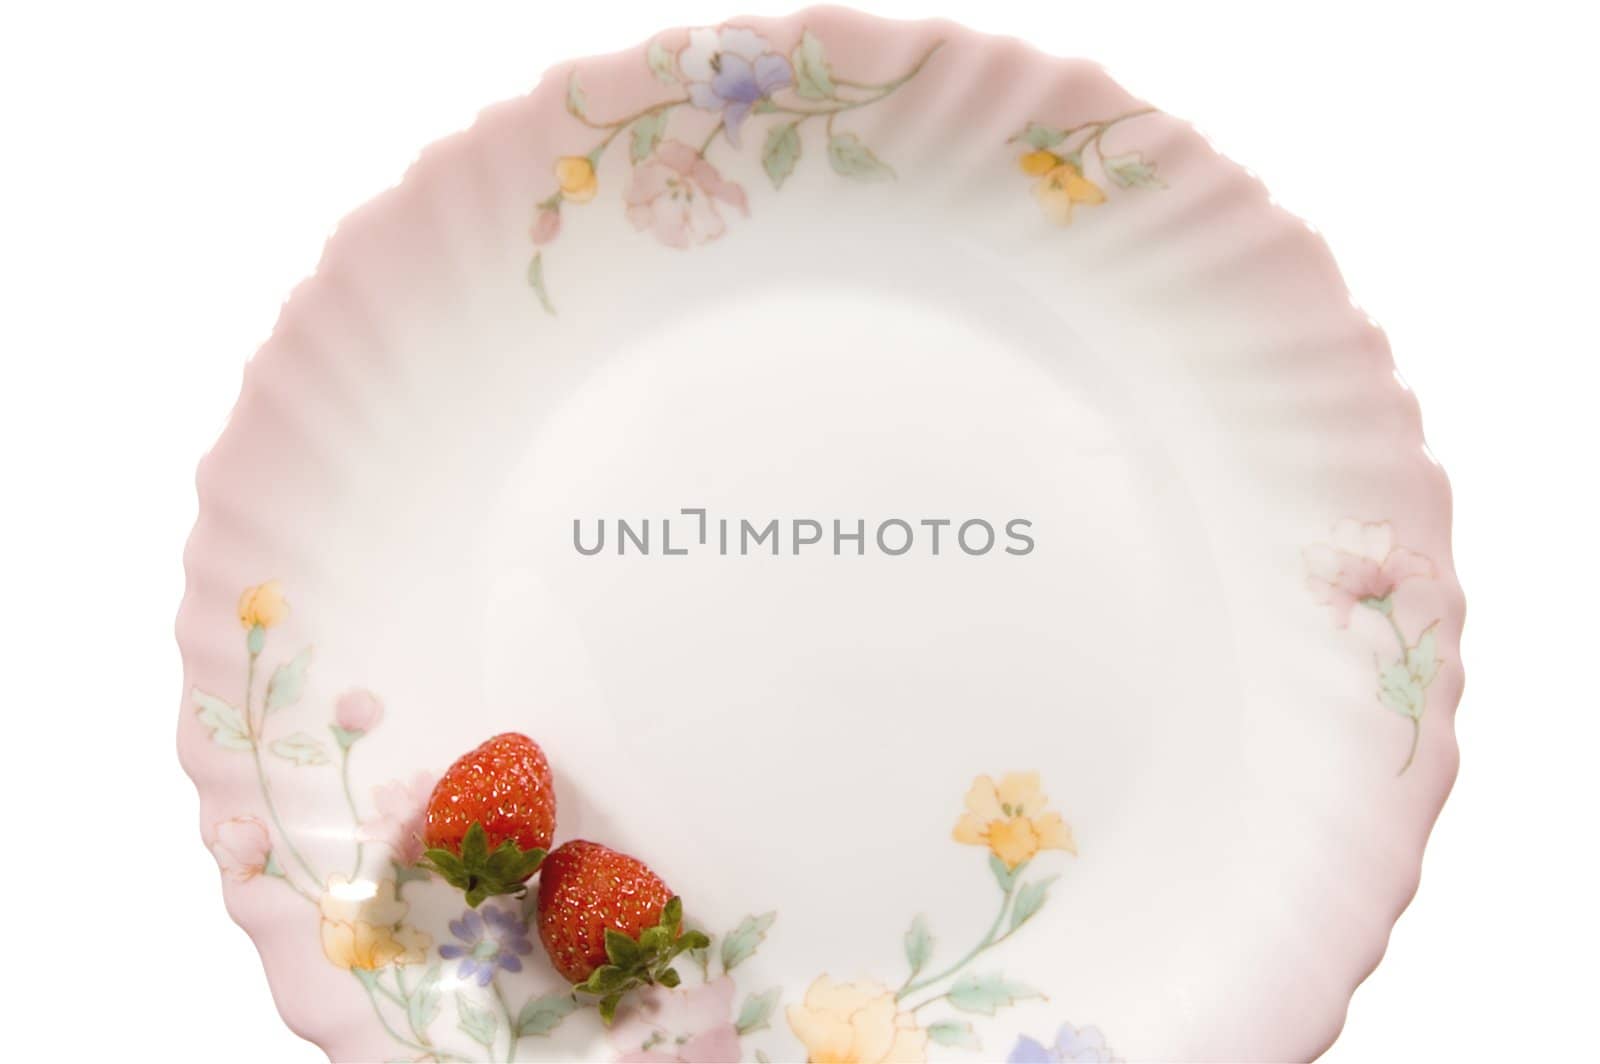 Two juicy strawberries on a tea saucer